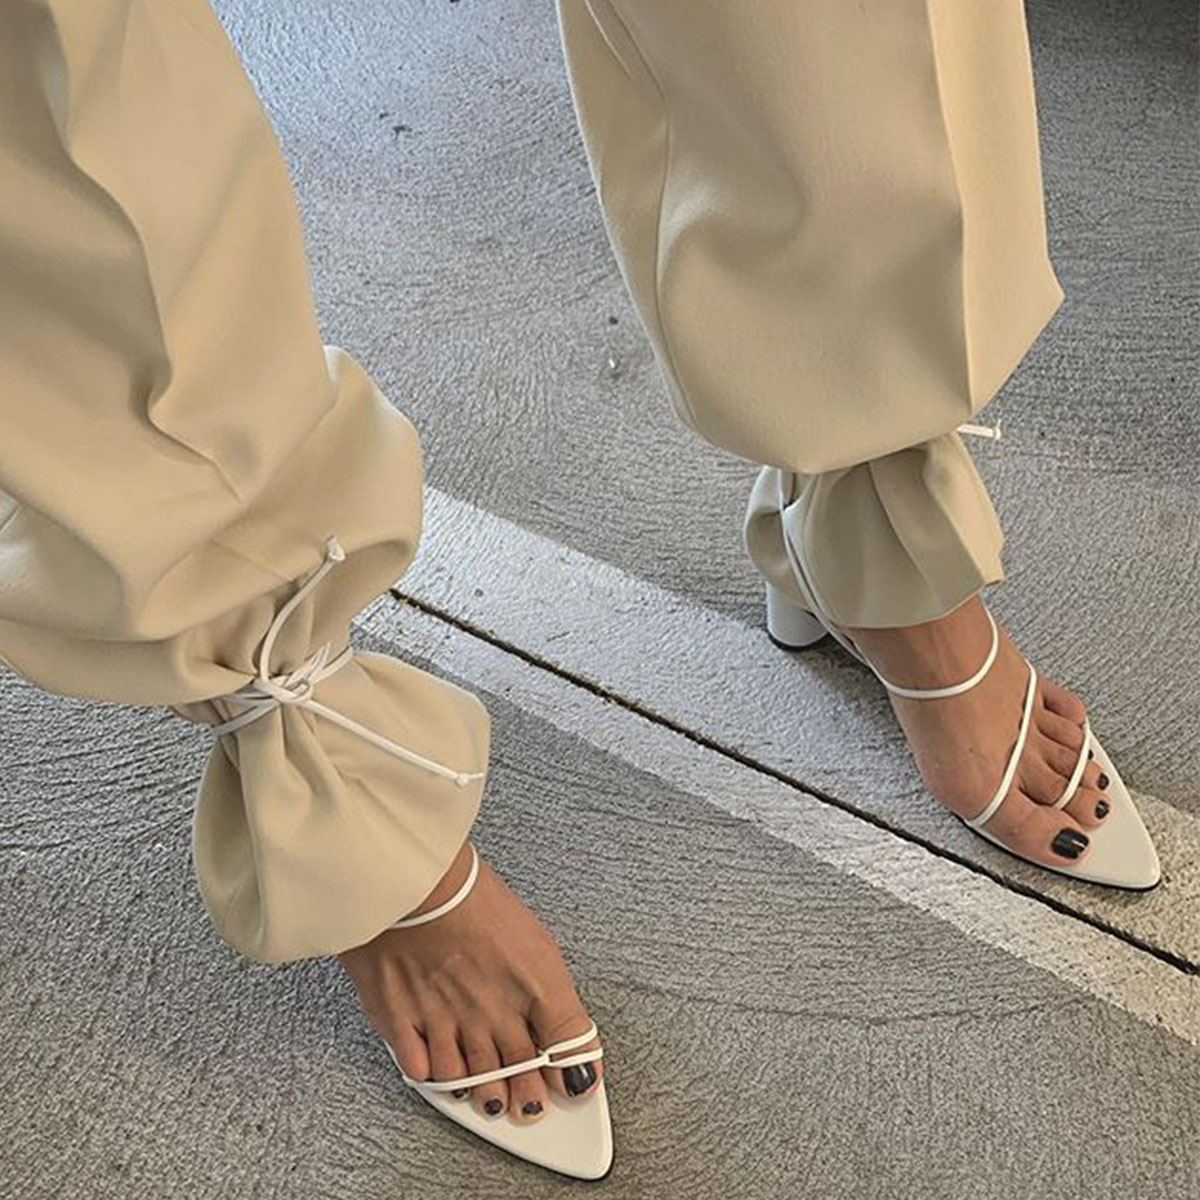 The Lace-Up Sandals Stlying Trick to 